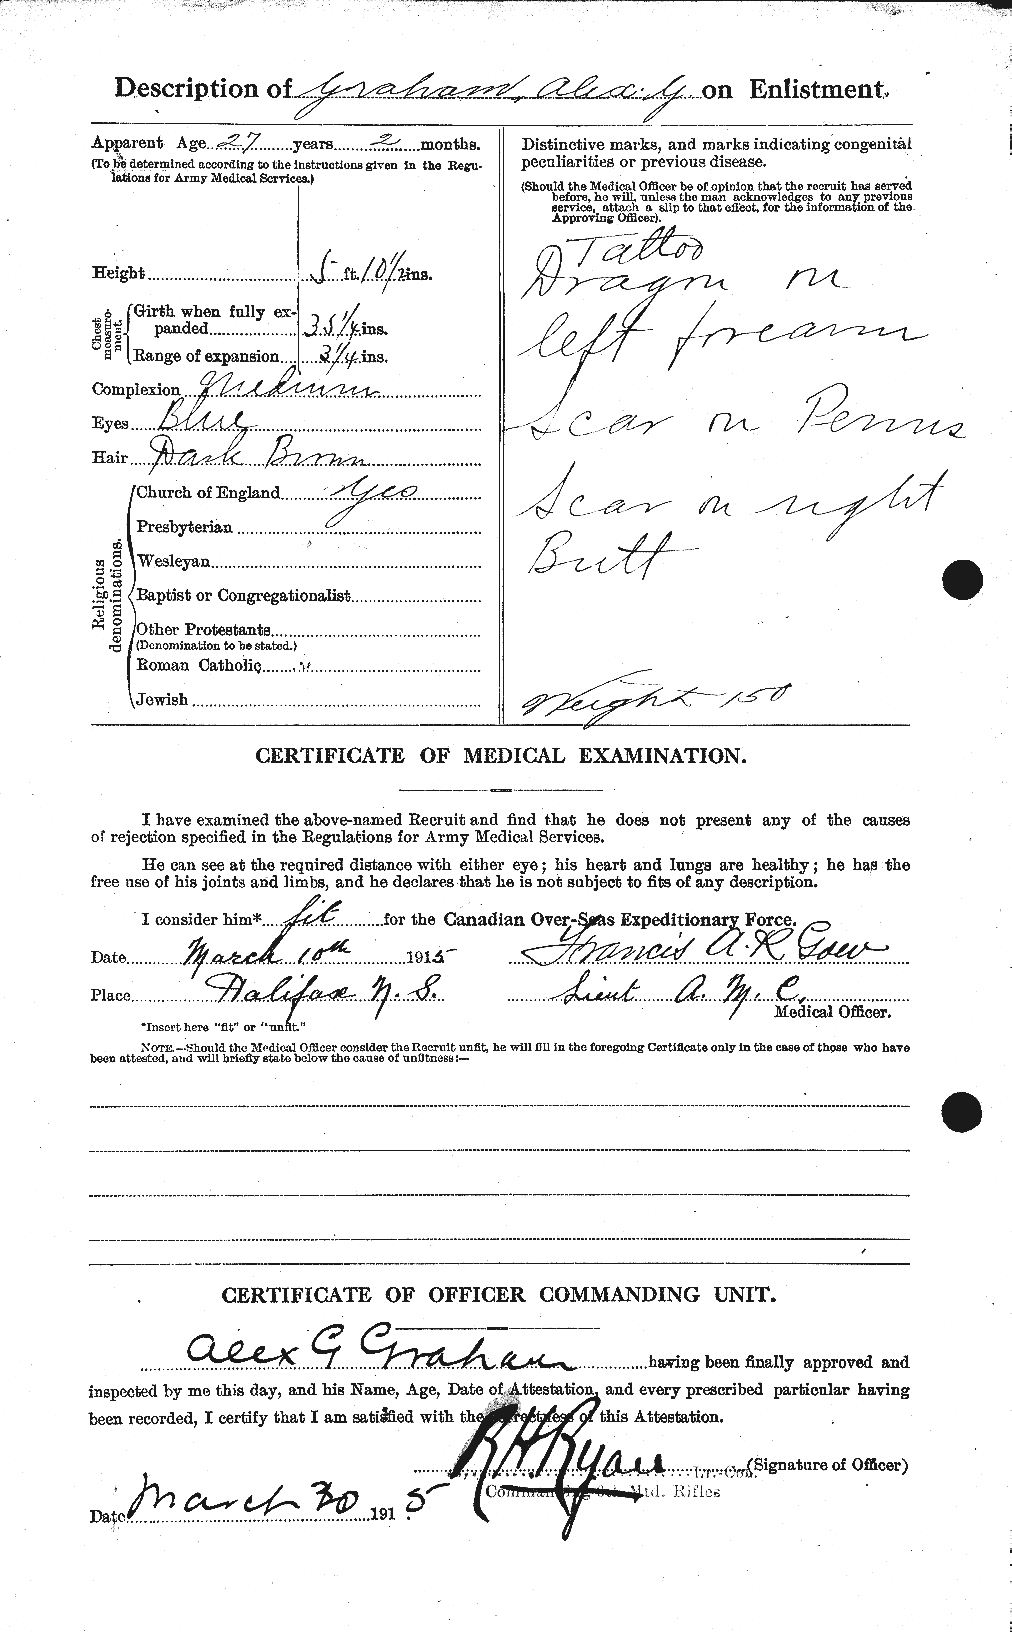 Personnel Records of the First World War - CEF 359586b